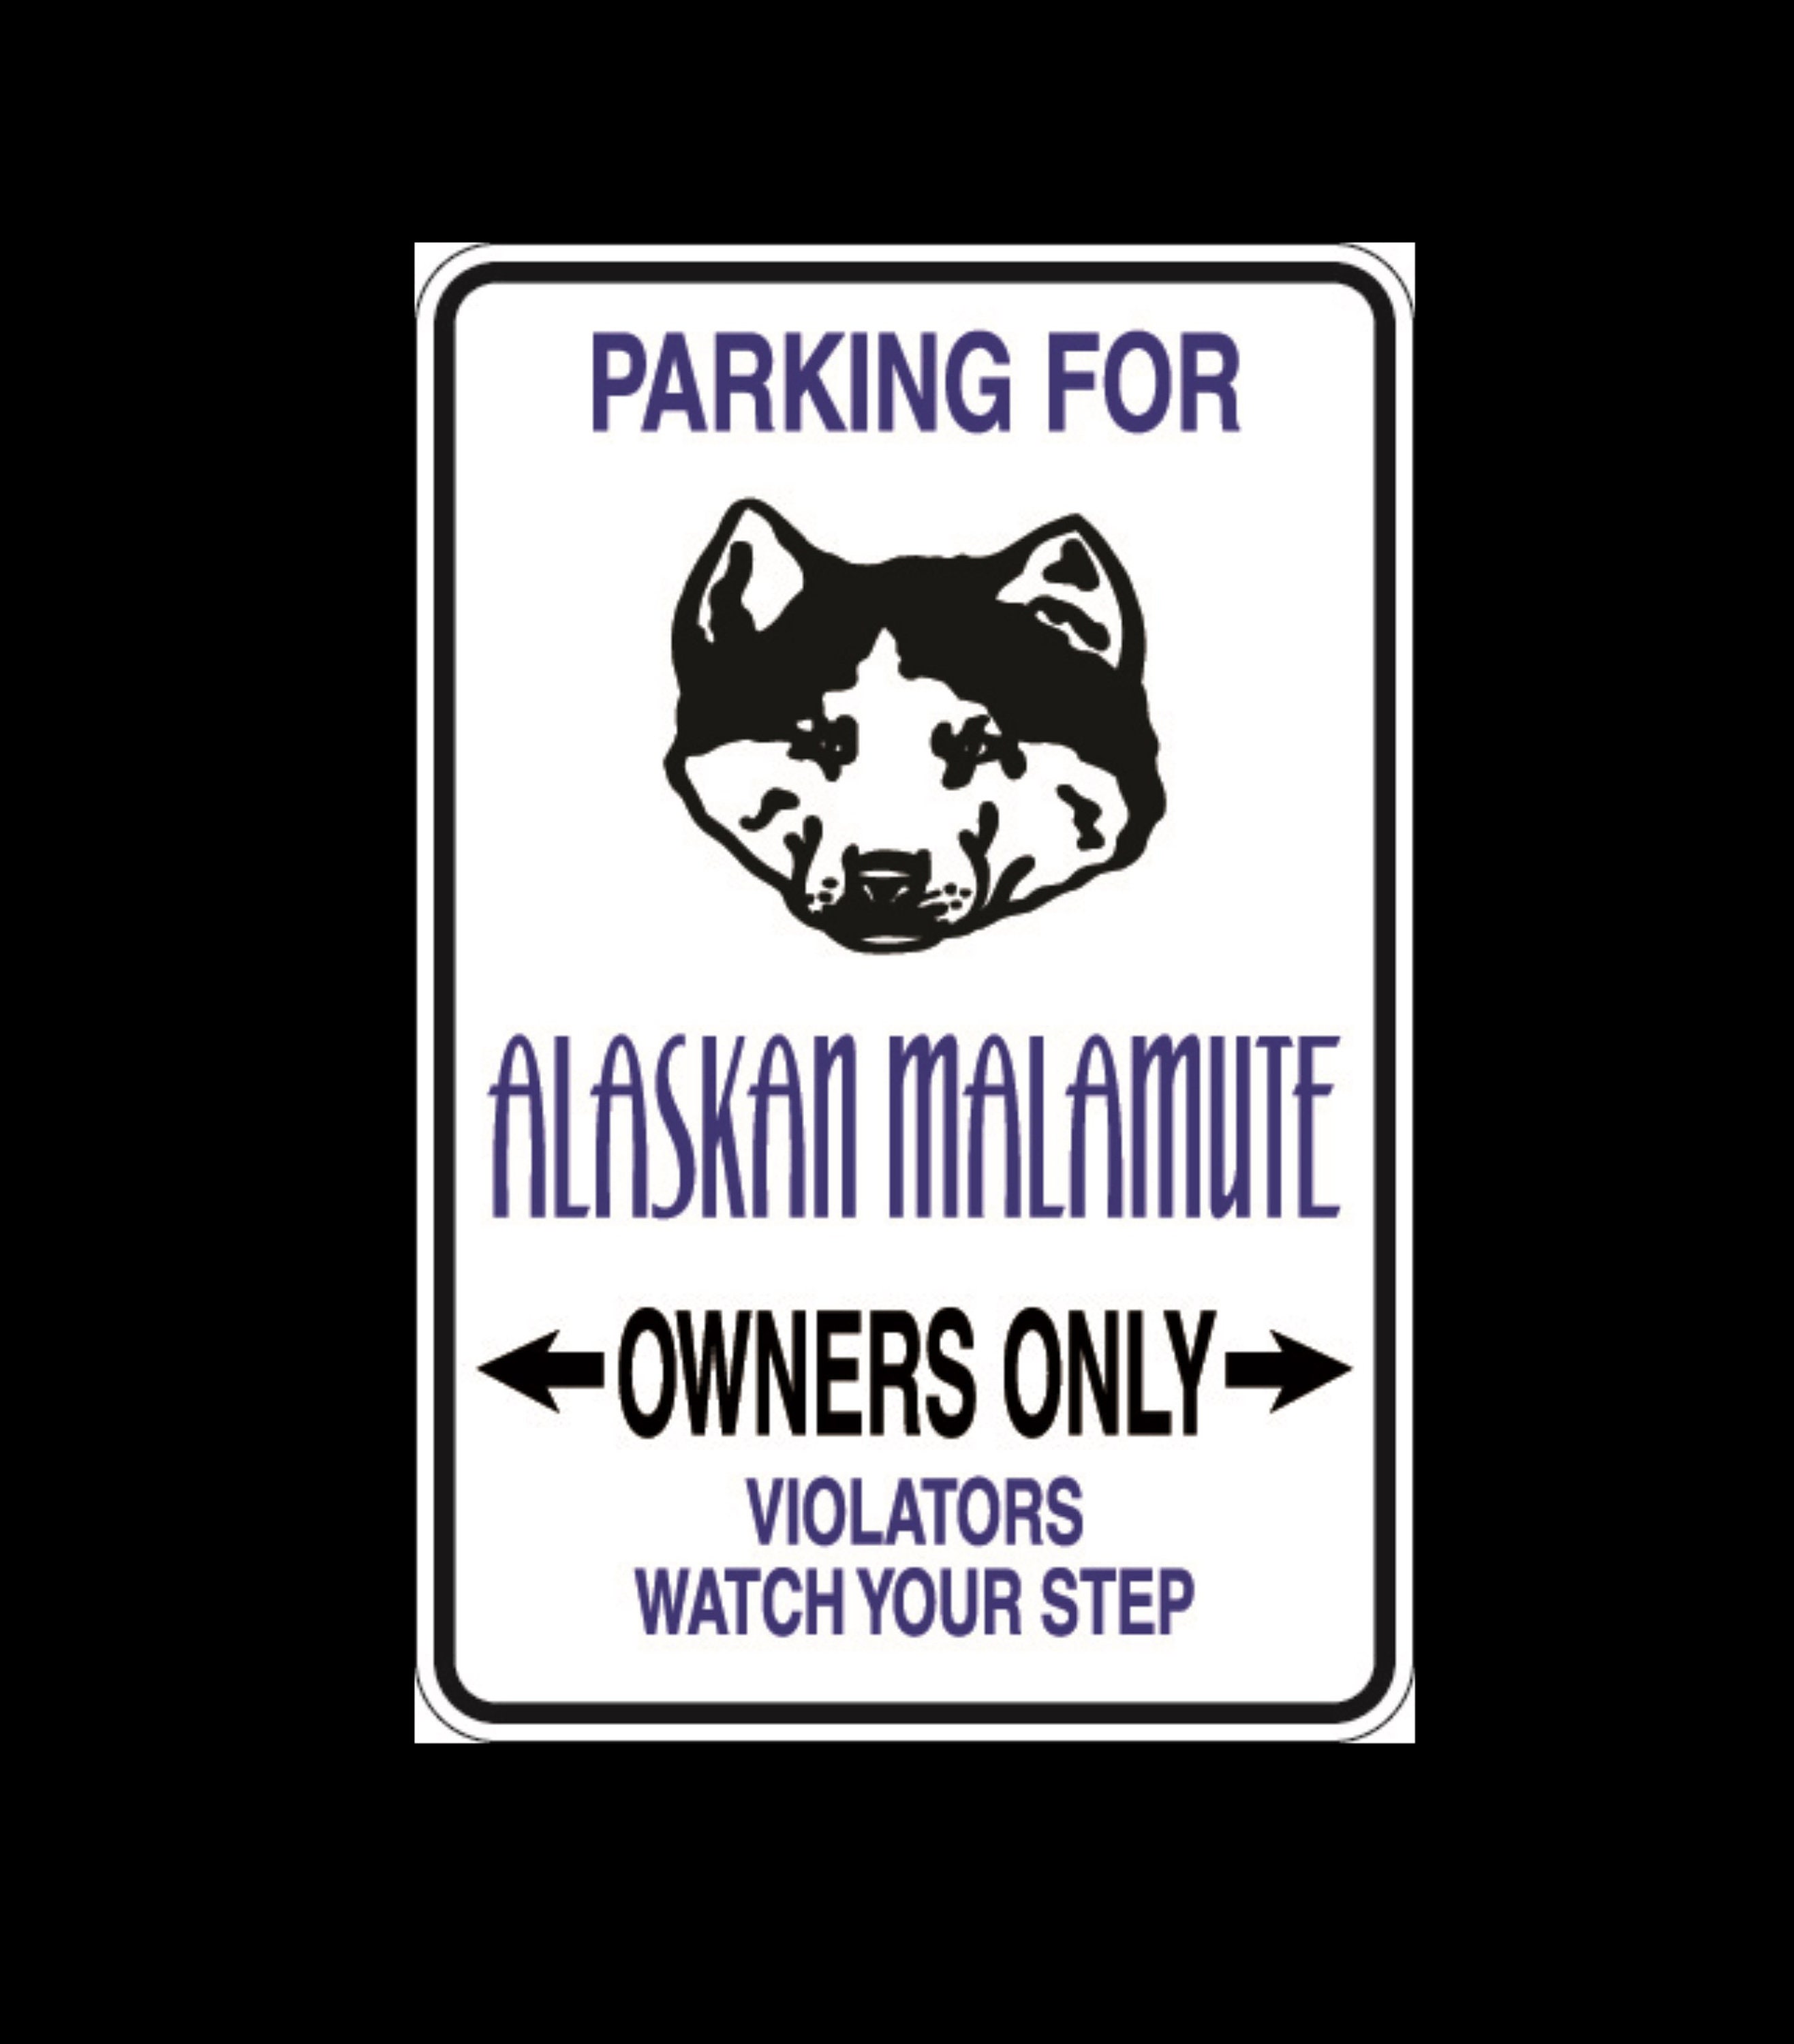 BEWARE OF THE ALASKAN MALAMUTE ENTER AT YOUR OWN RISK METAL SIGN.SECURITY SIGN. 